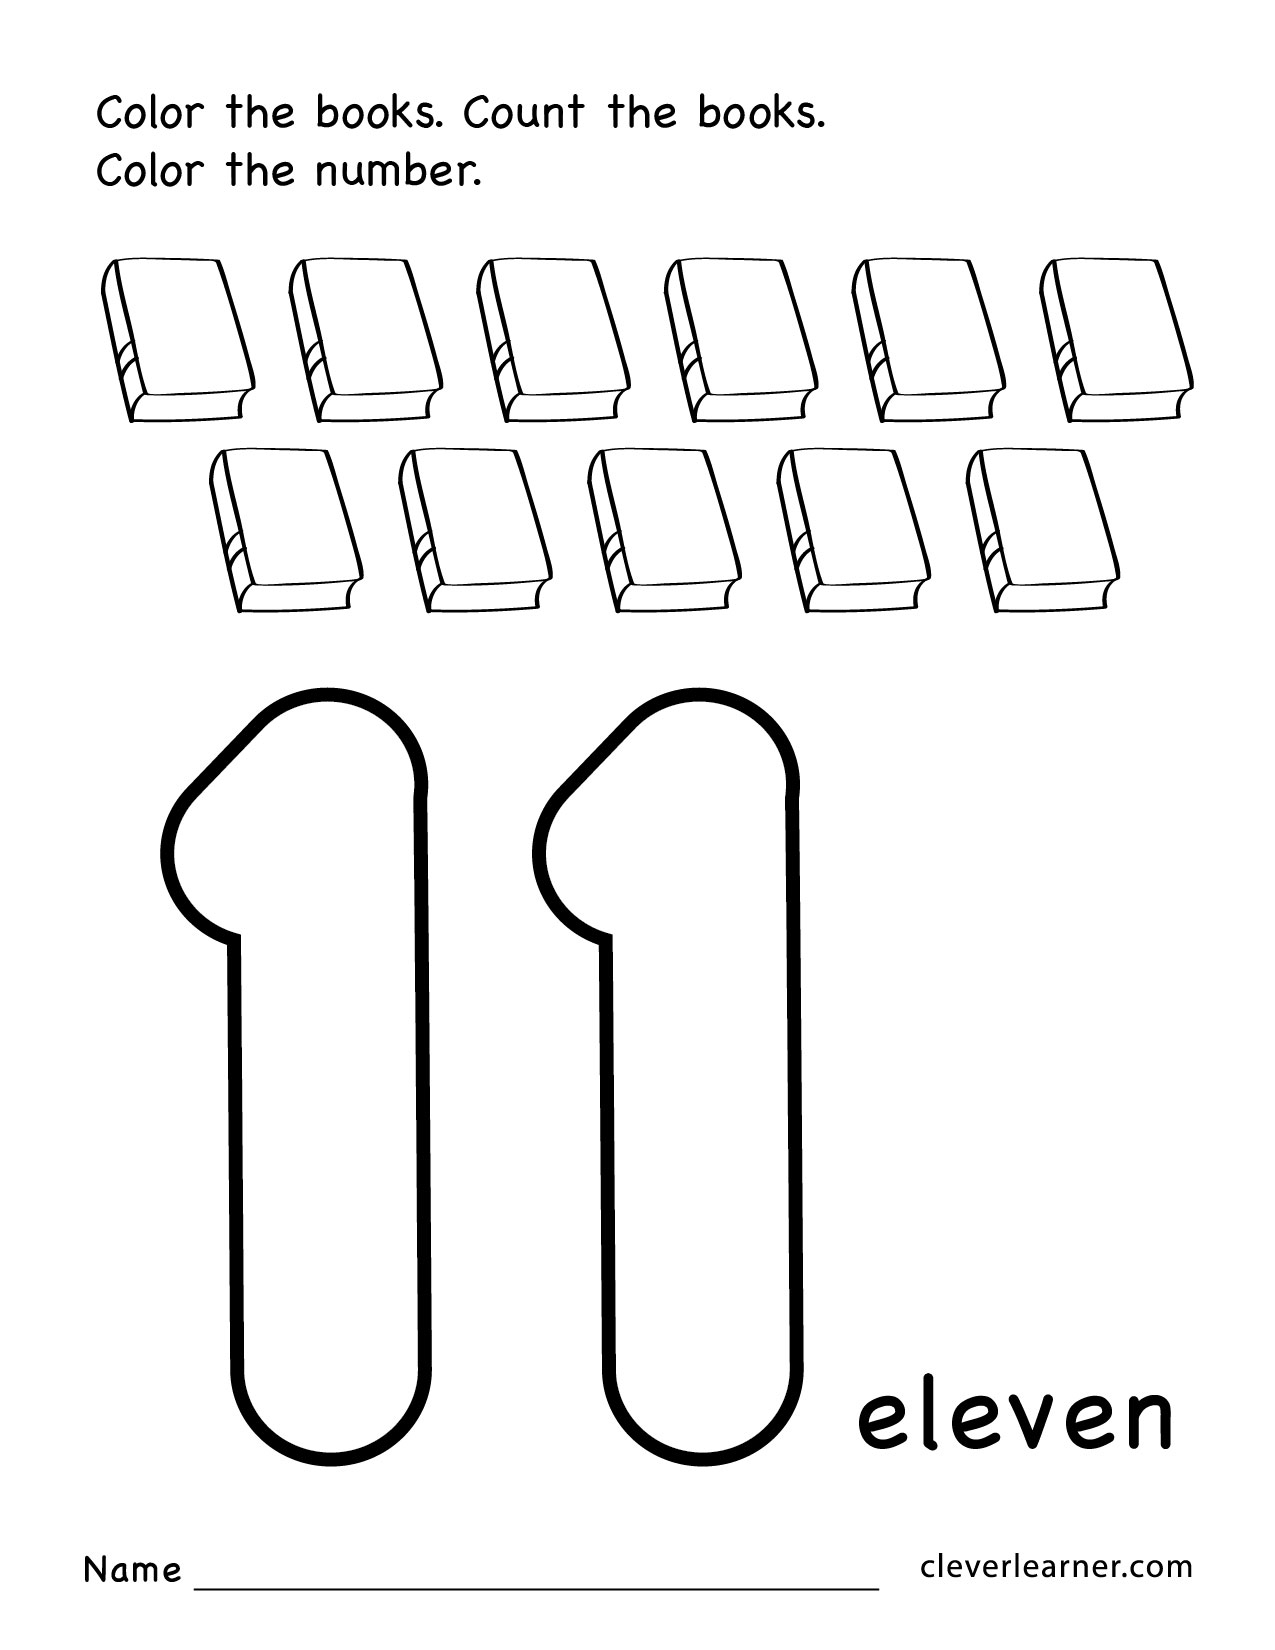 printable-numbers-number-11-color-the-number-11-coloring-page-twisty